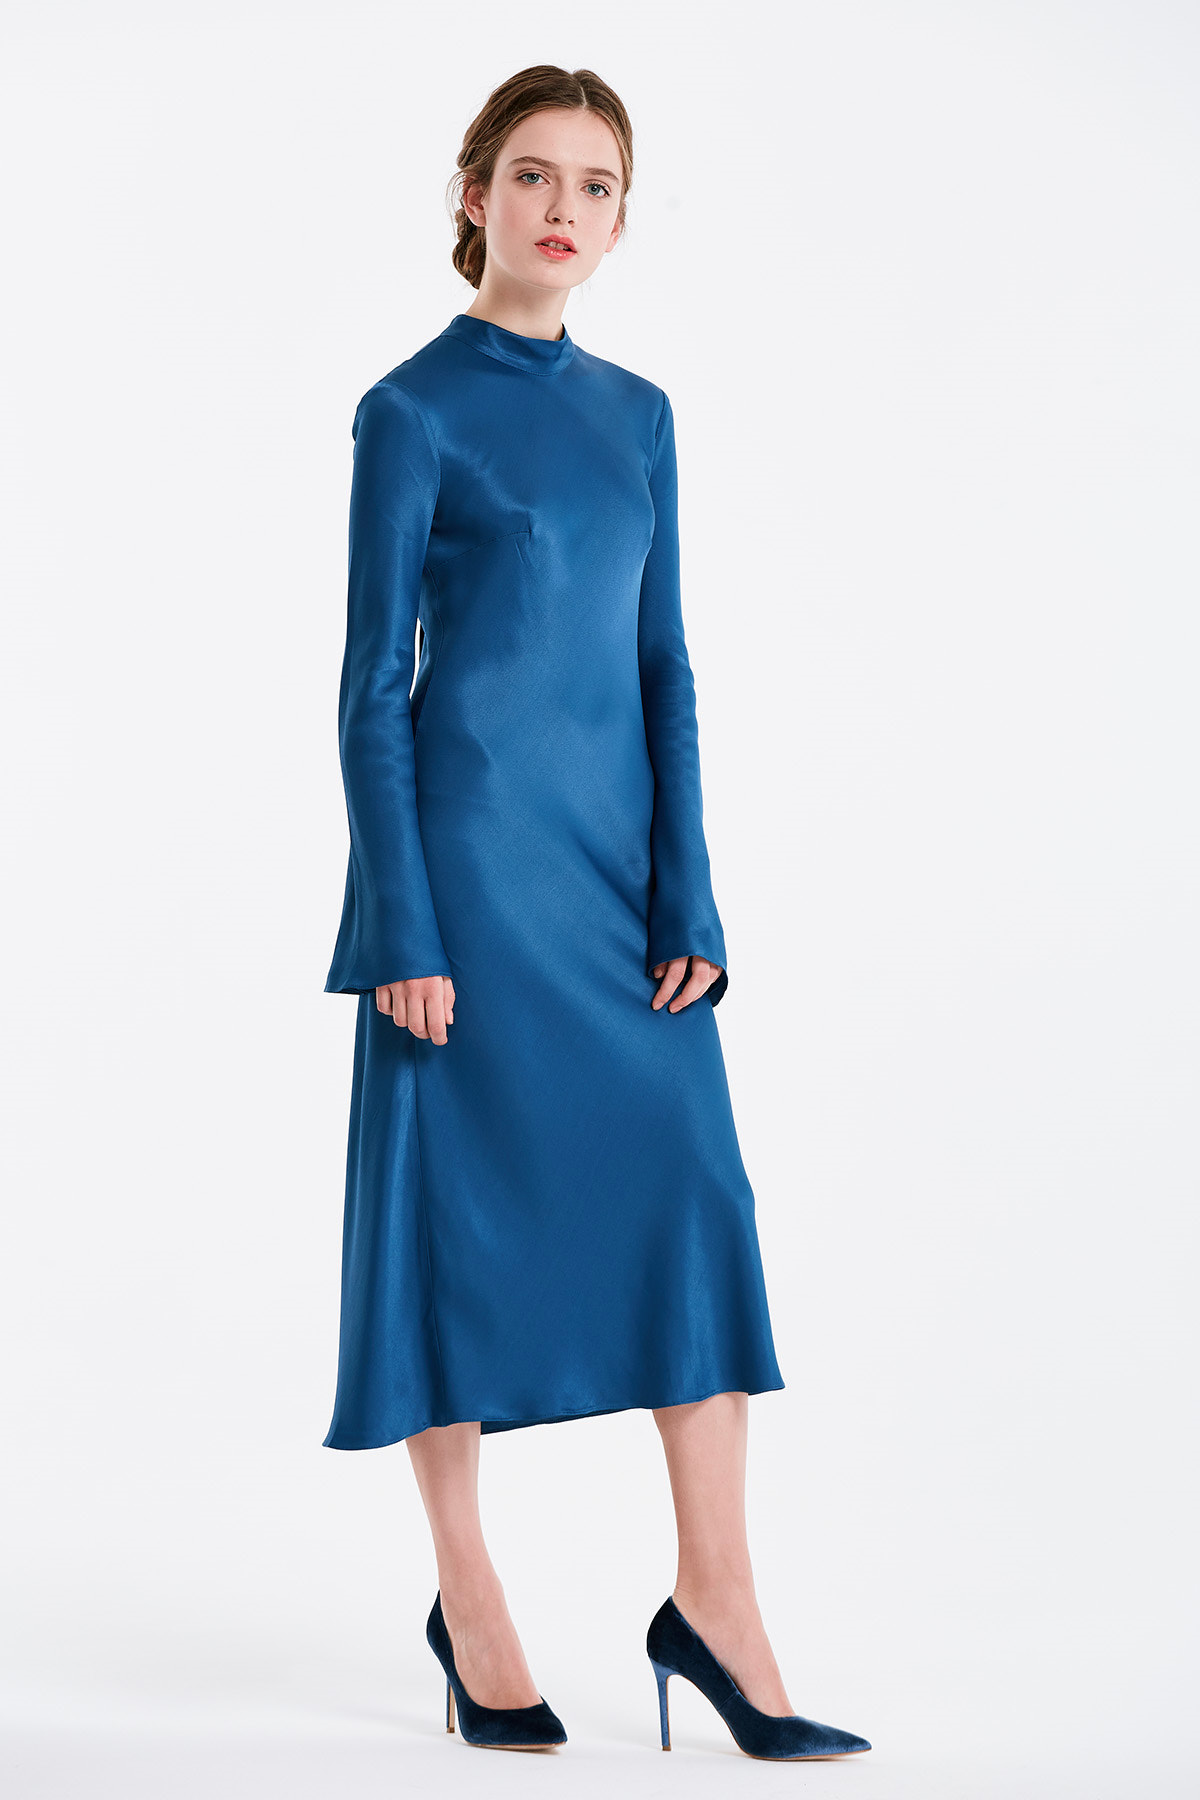 Blue dress with a bow at the back and flared sleeves, photo 2